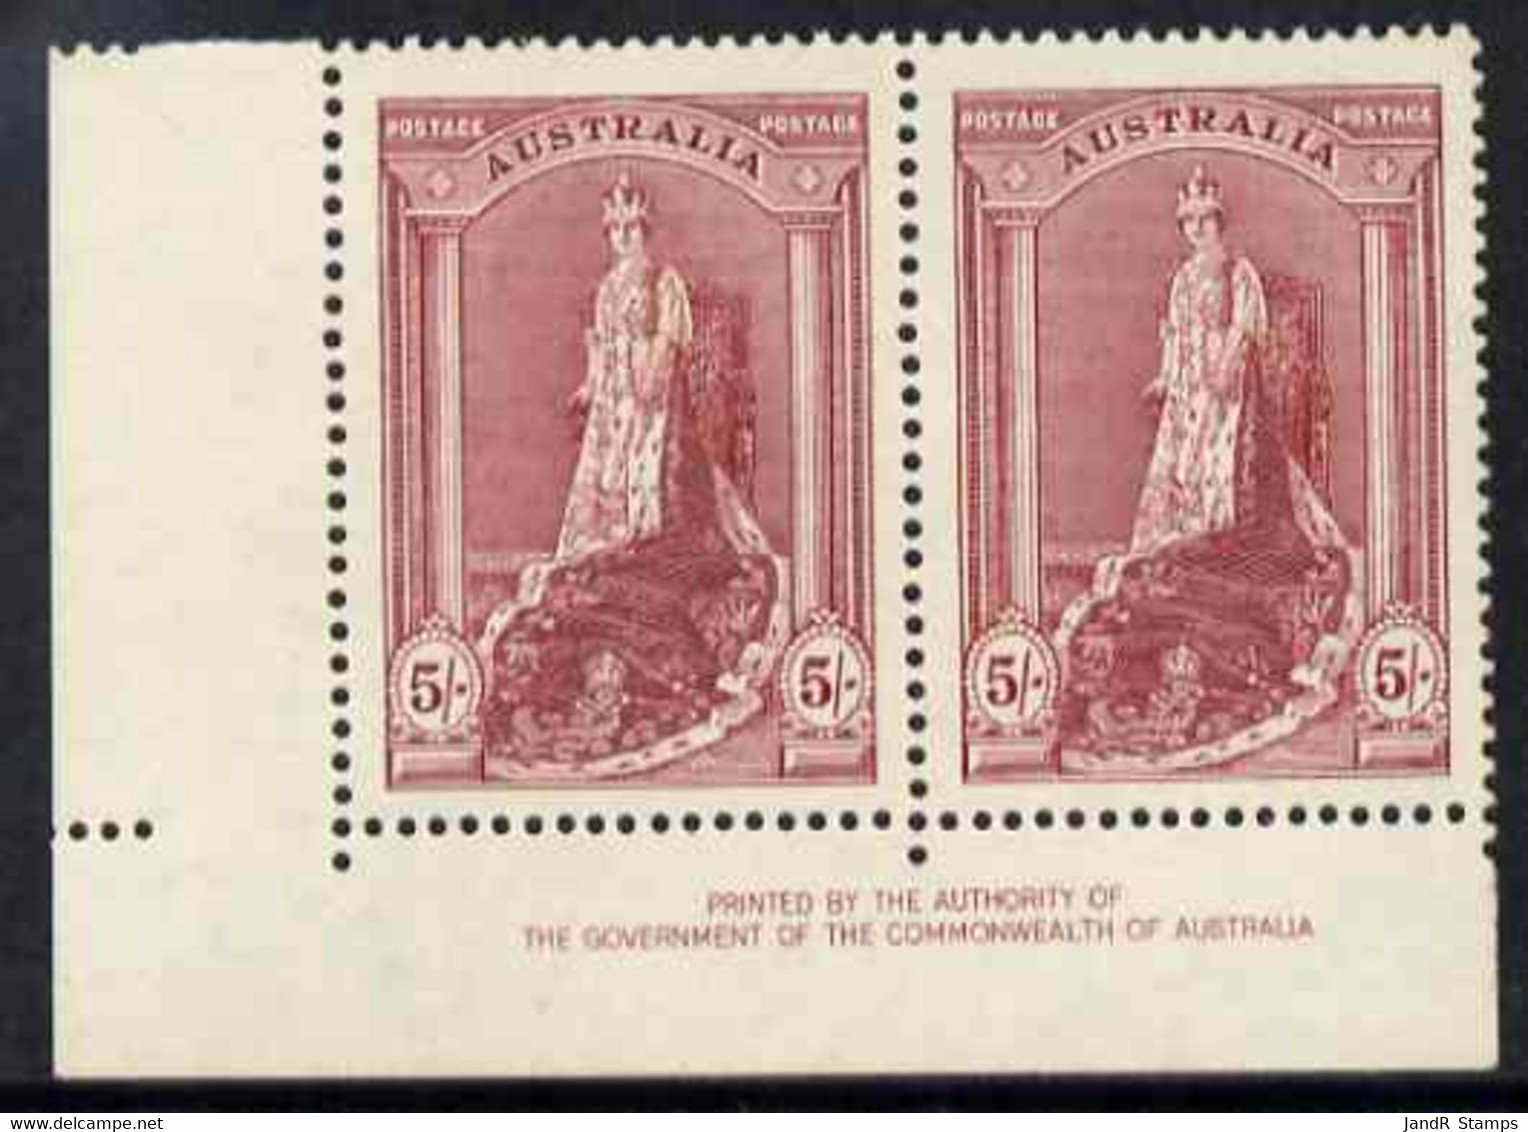 Australia 1937-49 KG6 Robes 5s By Authority Imprint Pair Very Fine Lightly Mounted Mint - Nuevos